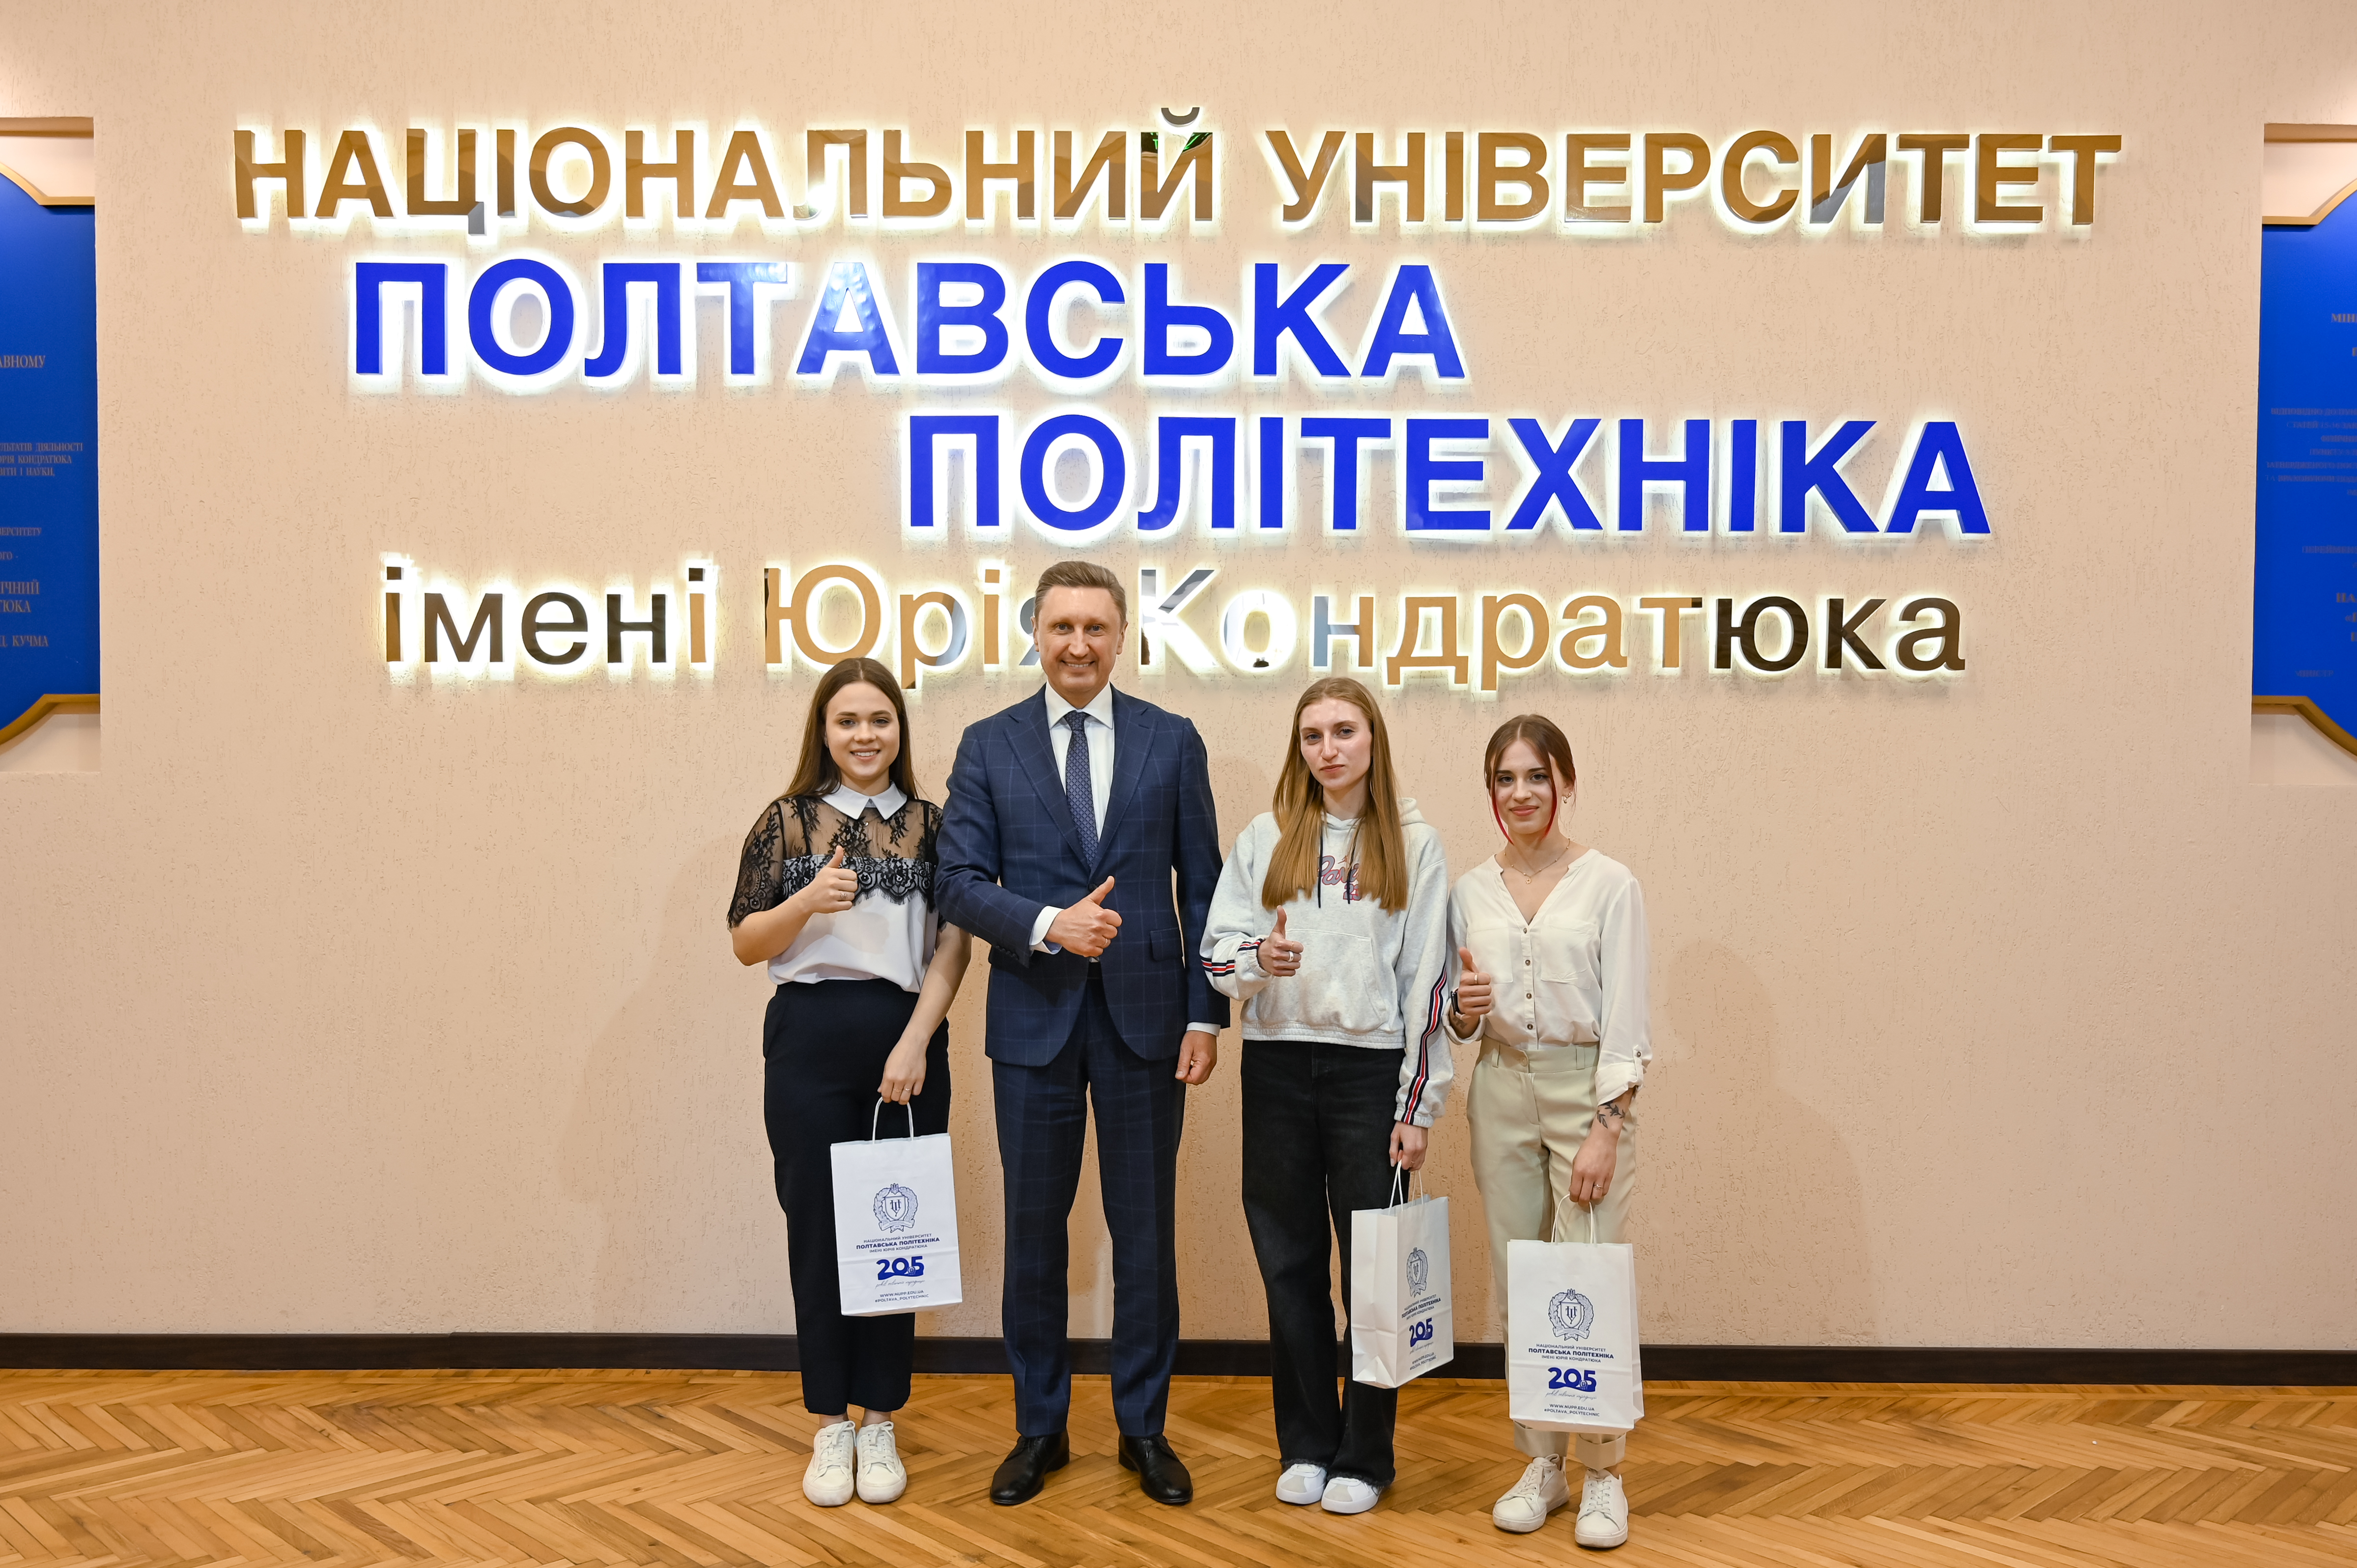 Three Polytechnic students become winners of the scholarship of the President of Ukraine